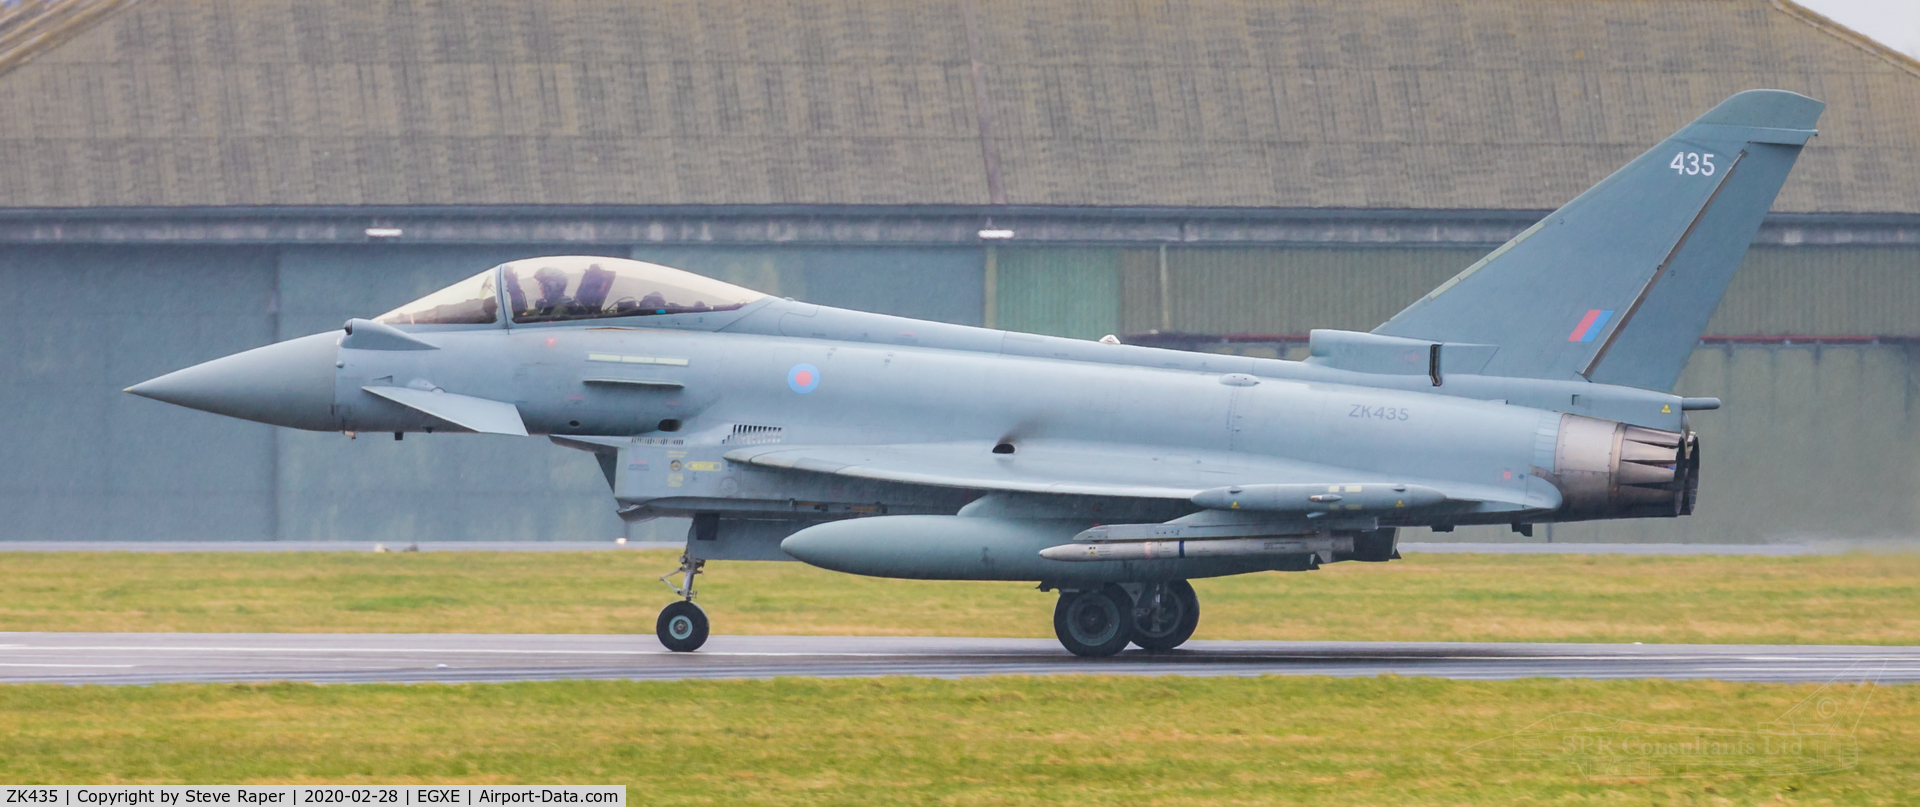 ZK435, 2018 Eurofighter EF-2000 Typhoon FGR4 C/N BS151, A very rainy RAF Leeming. Returning after a NATO exercise sortie.